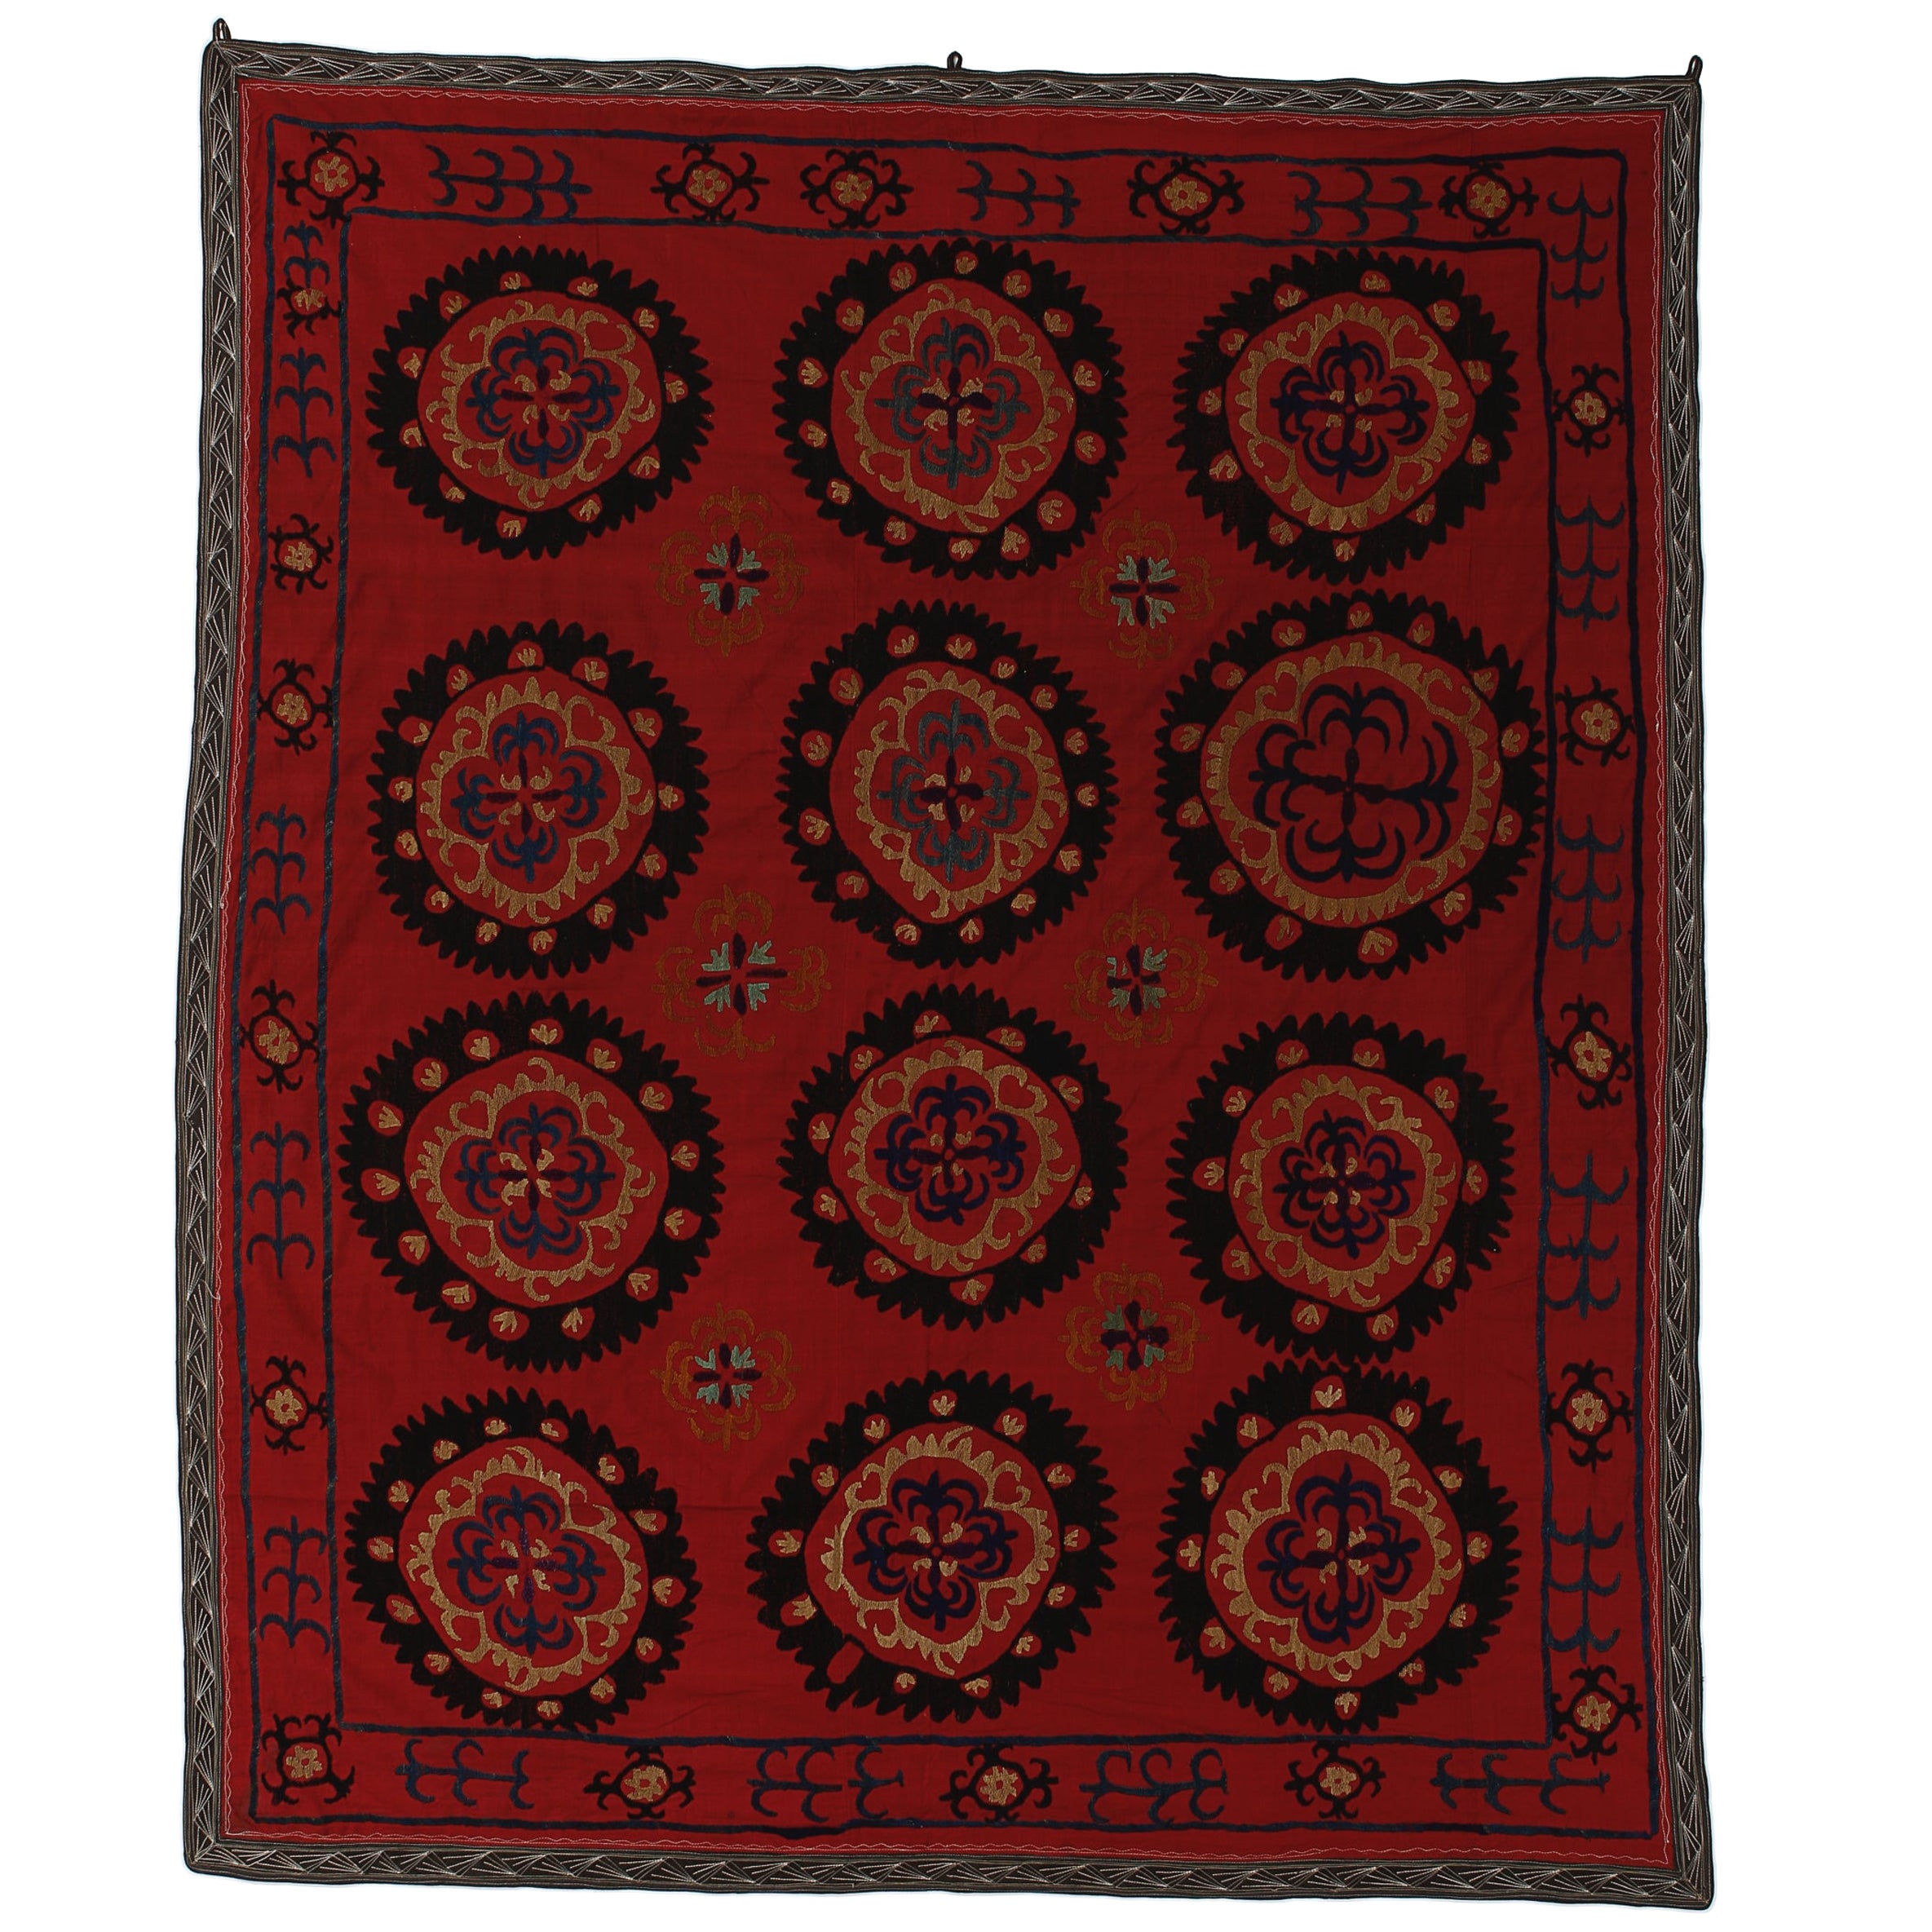 Vintage Suzani Bed Cover, Silk Embroidery Handmade Uzbek Wall Hanging